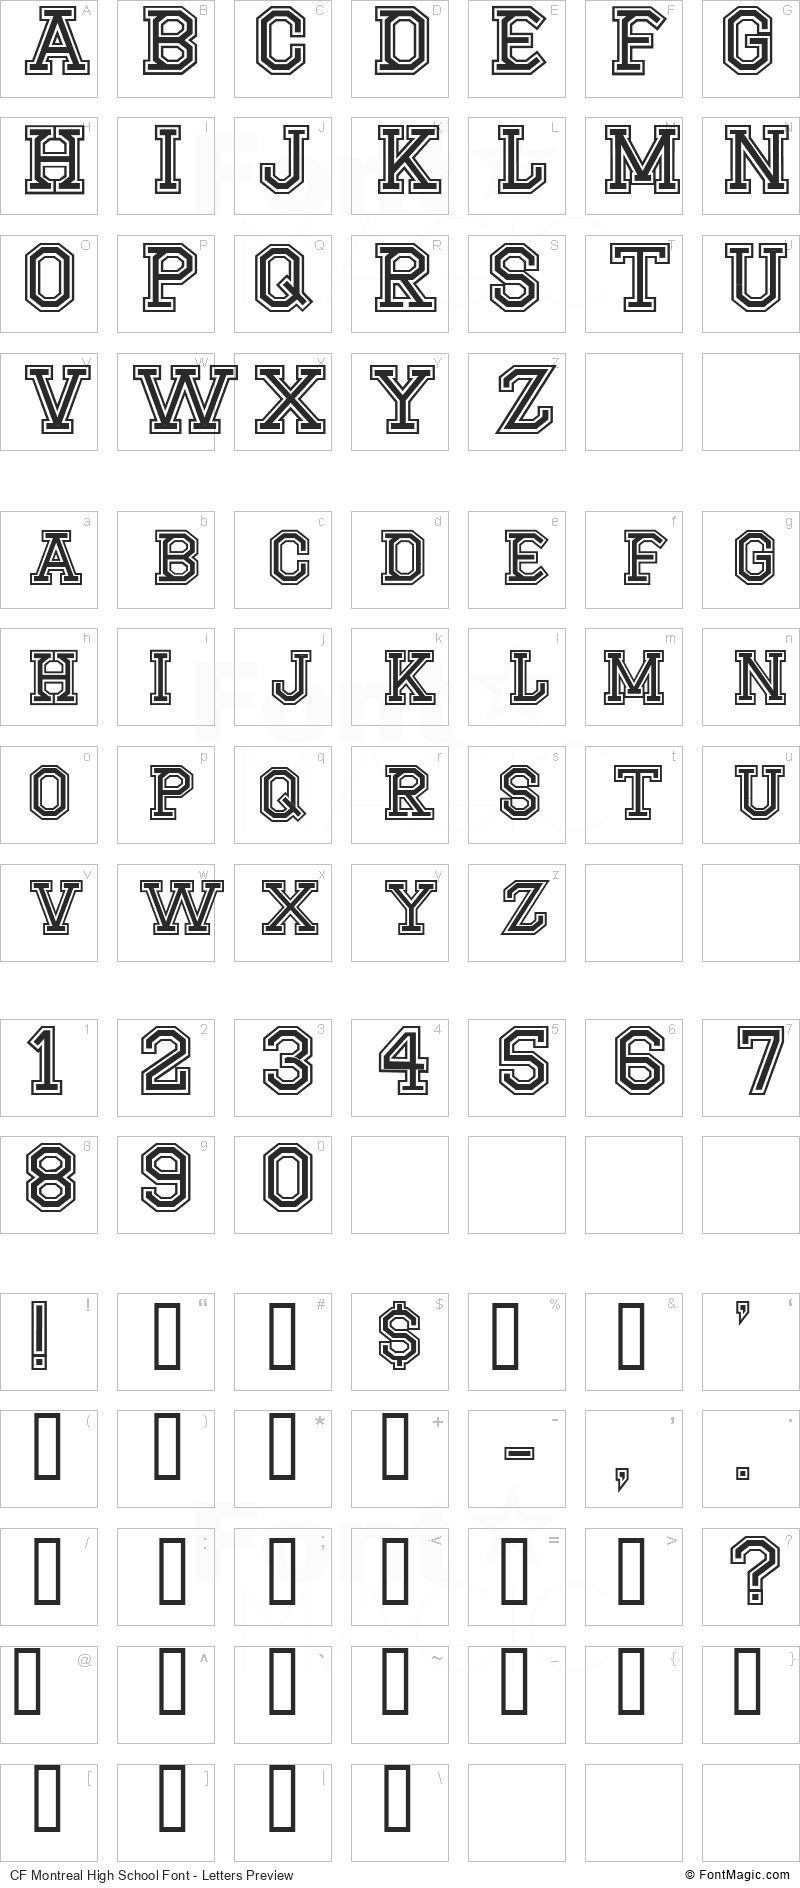 CF Montreal High School Font - All Latters Preview Chart